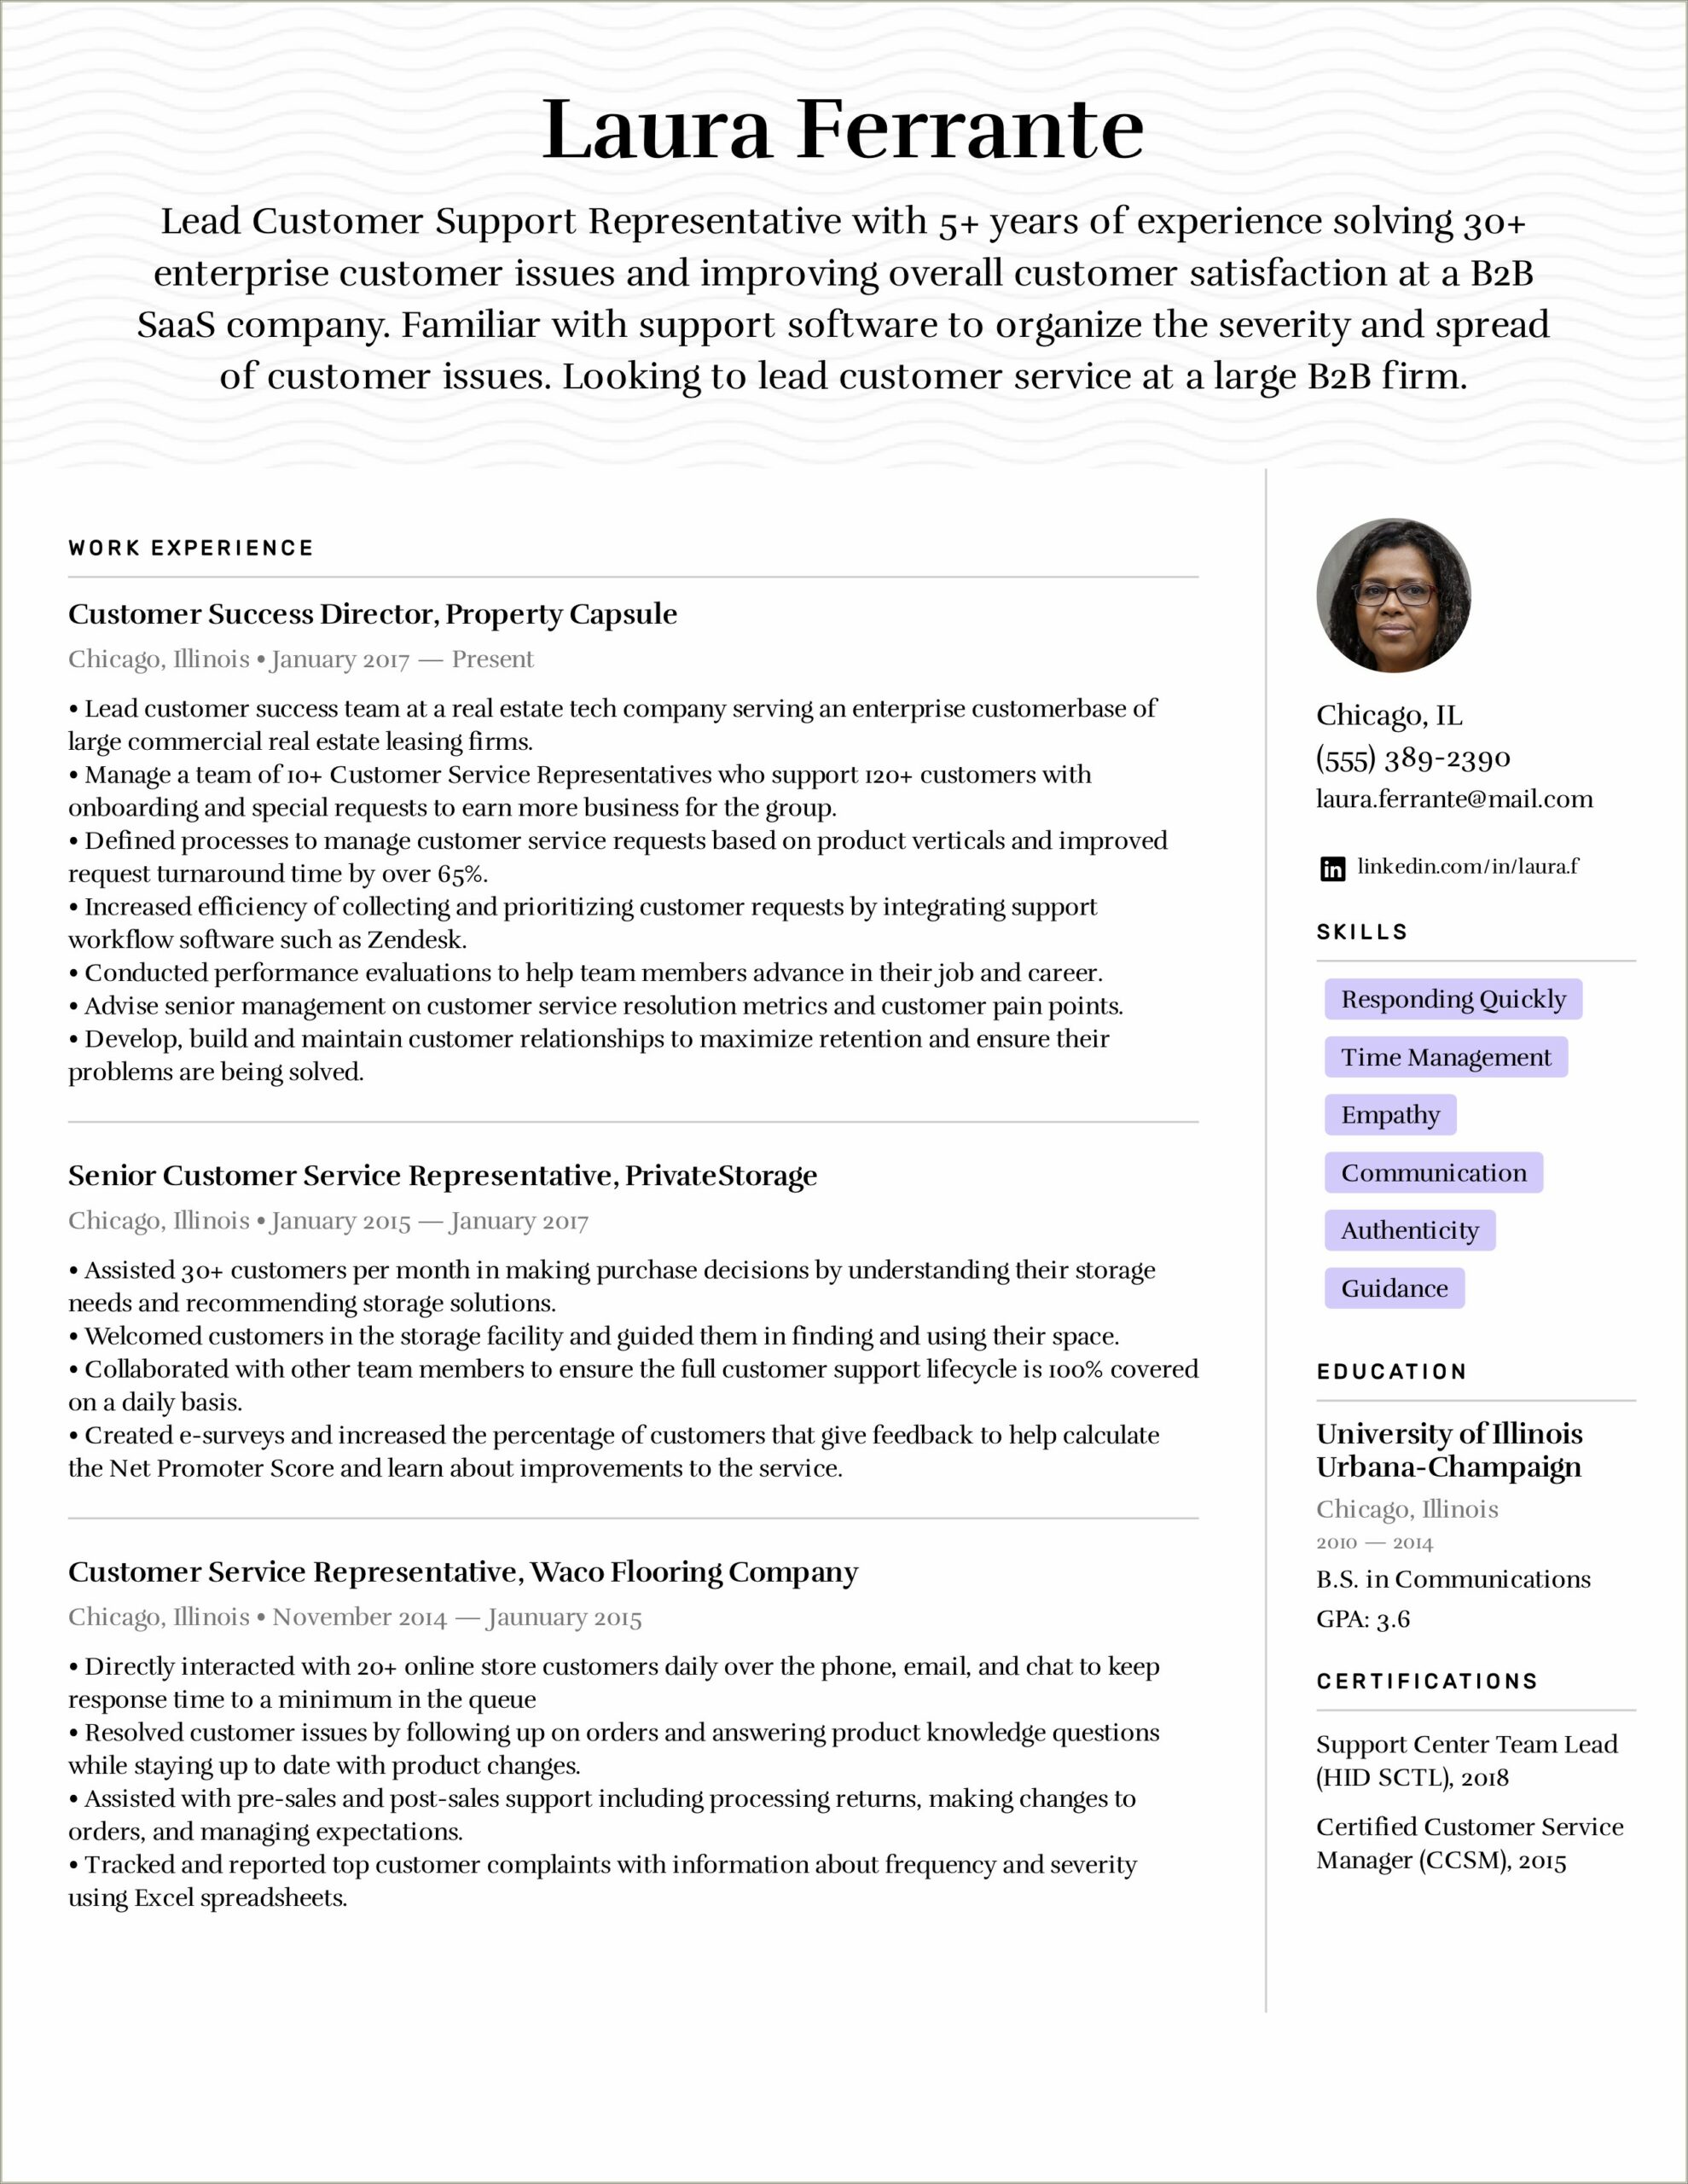 Functional Summary On Resume For Customer Service